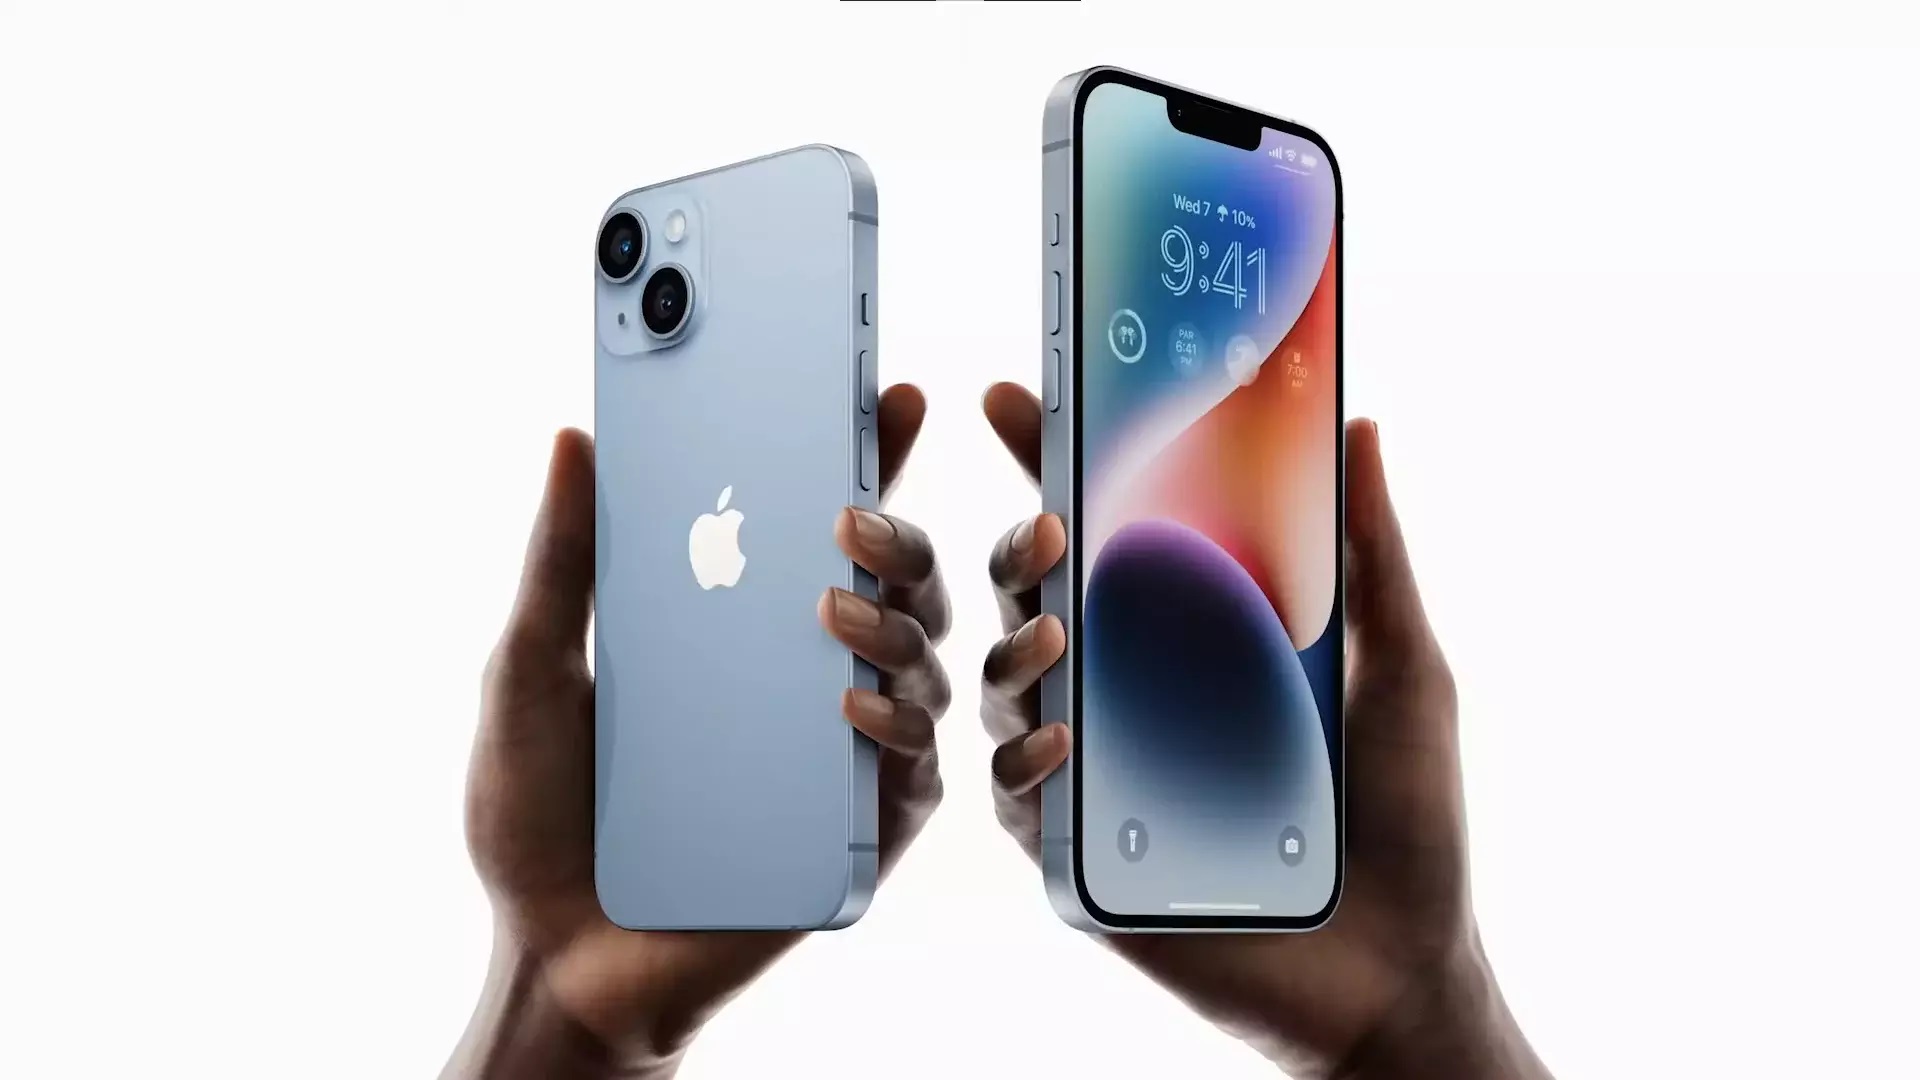 Kuo and Gurman are sure there will be no iPhone 15 Pro Max in 2023 - it will be replaced by the Ultra version